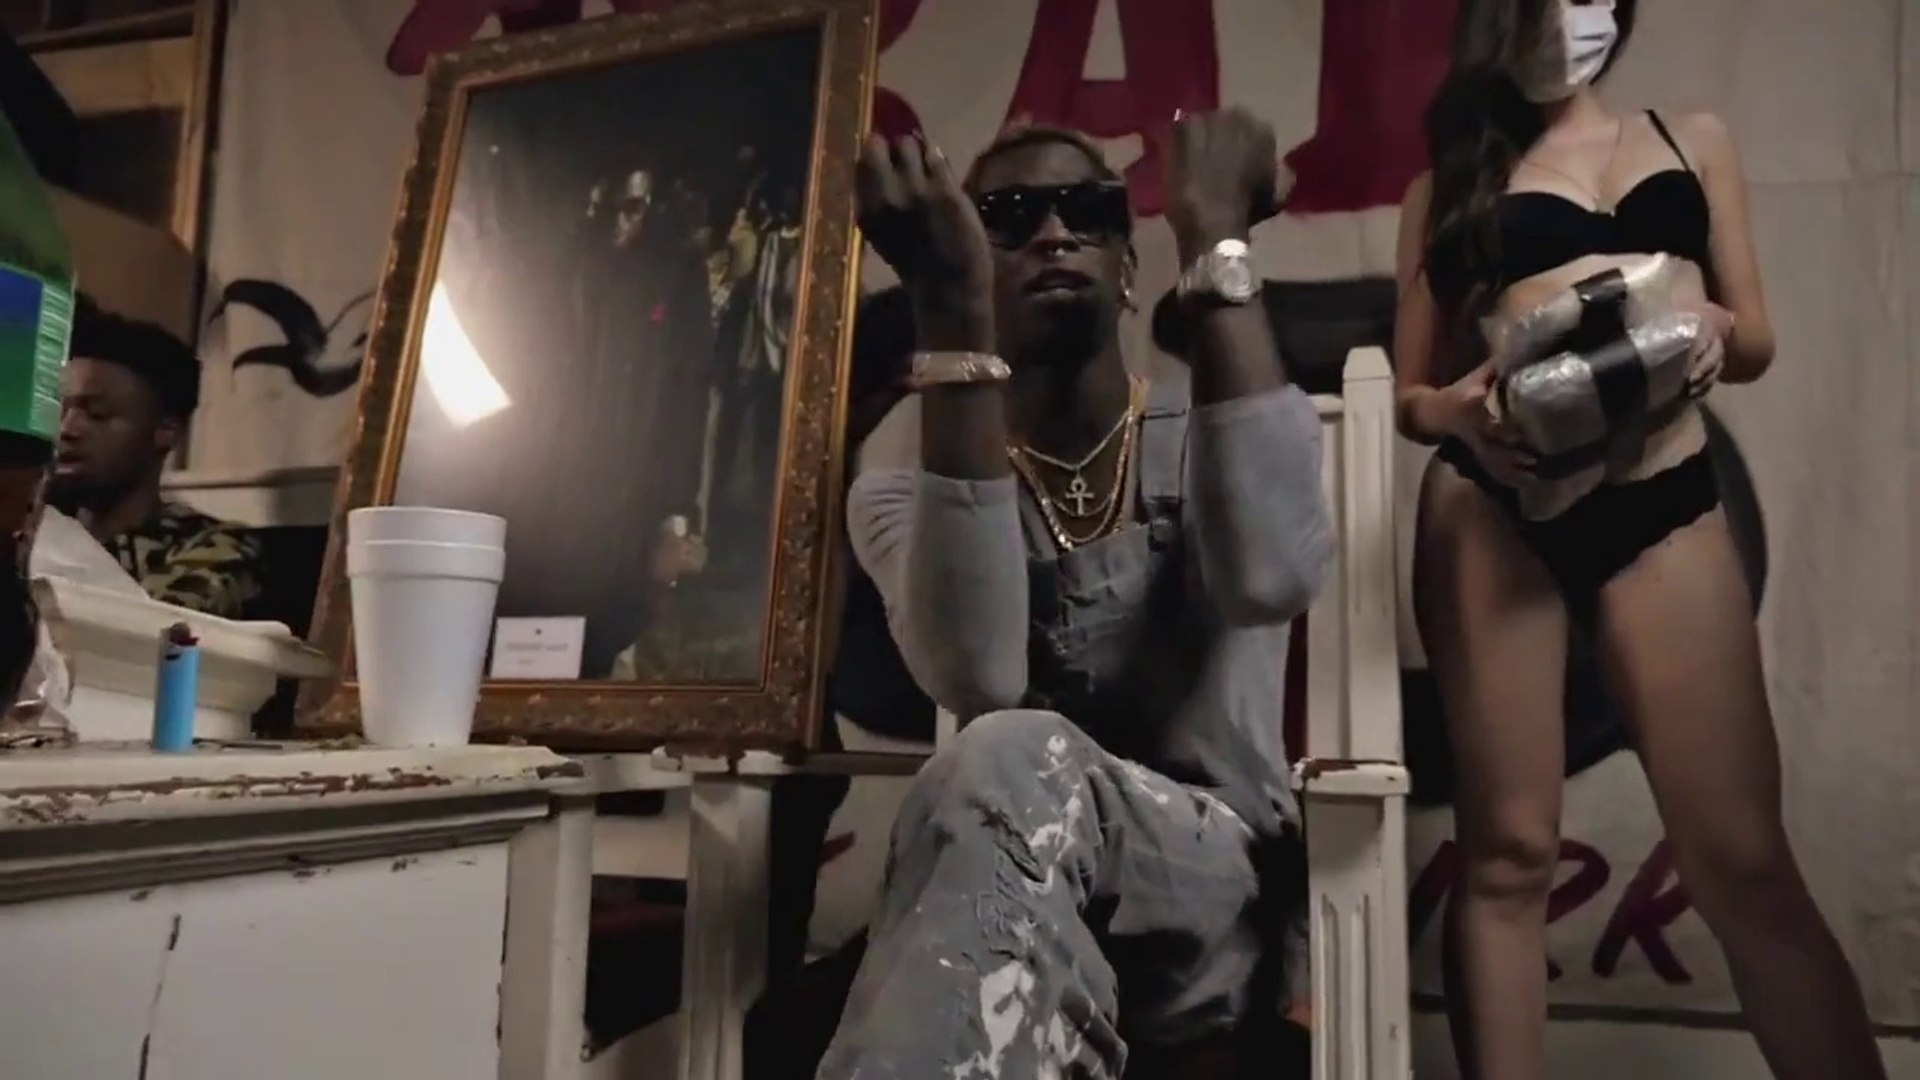 YOUNG T. ft GUCCI MANE " Again " (Video 2015). - Vidéo Dailymotion